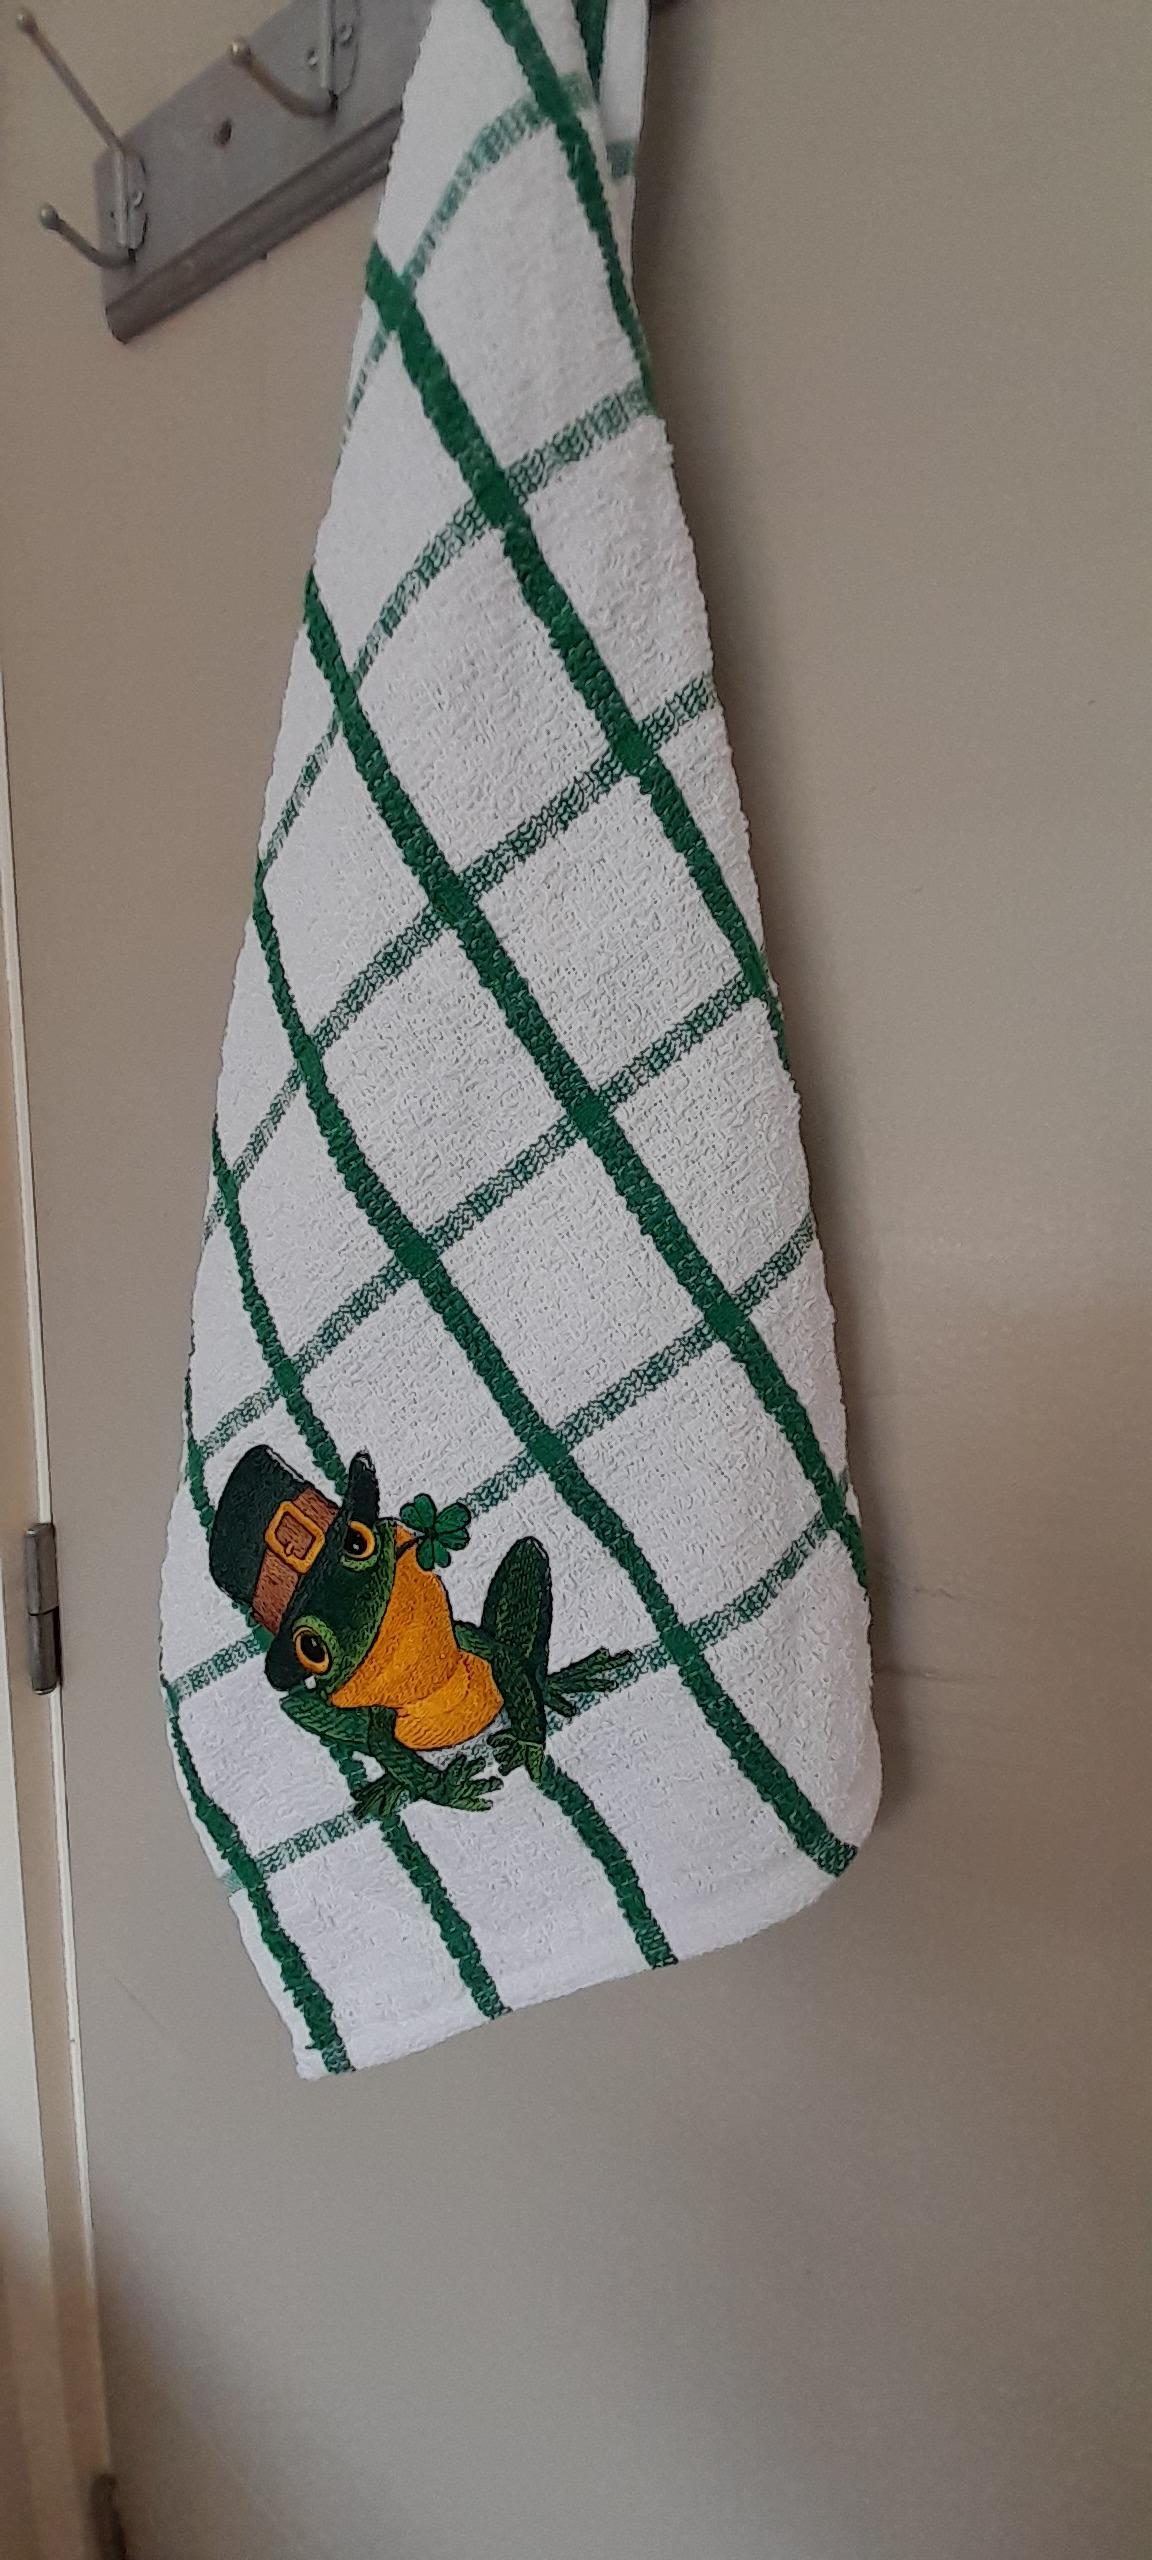 Kitchen towel with irish frog embroidery design